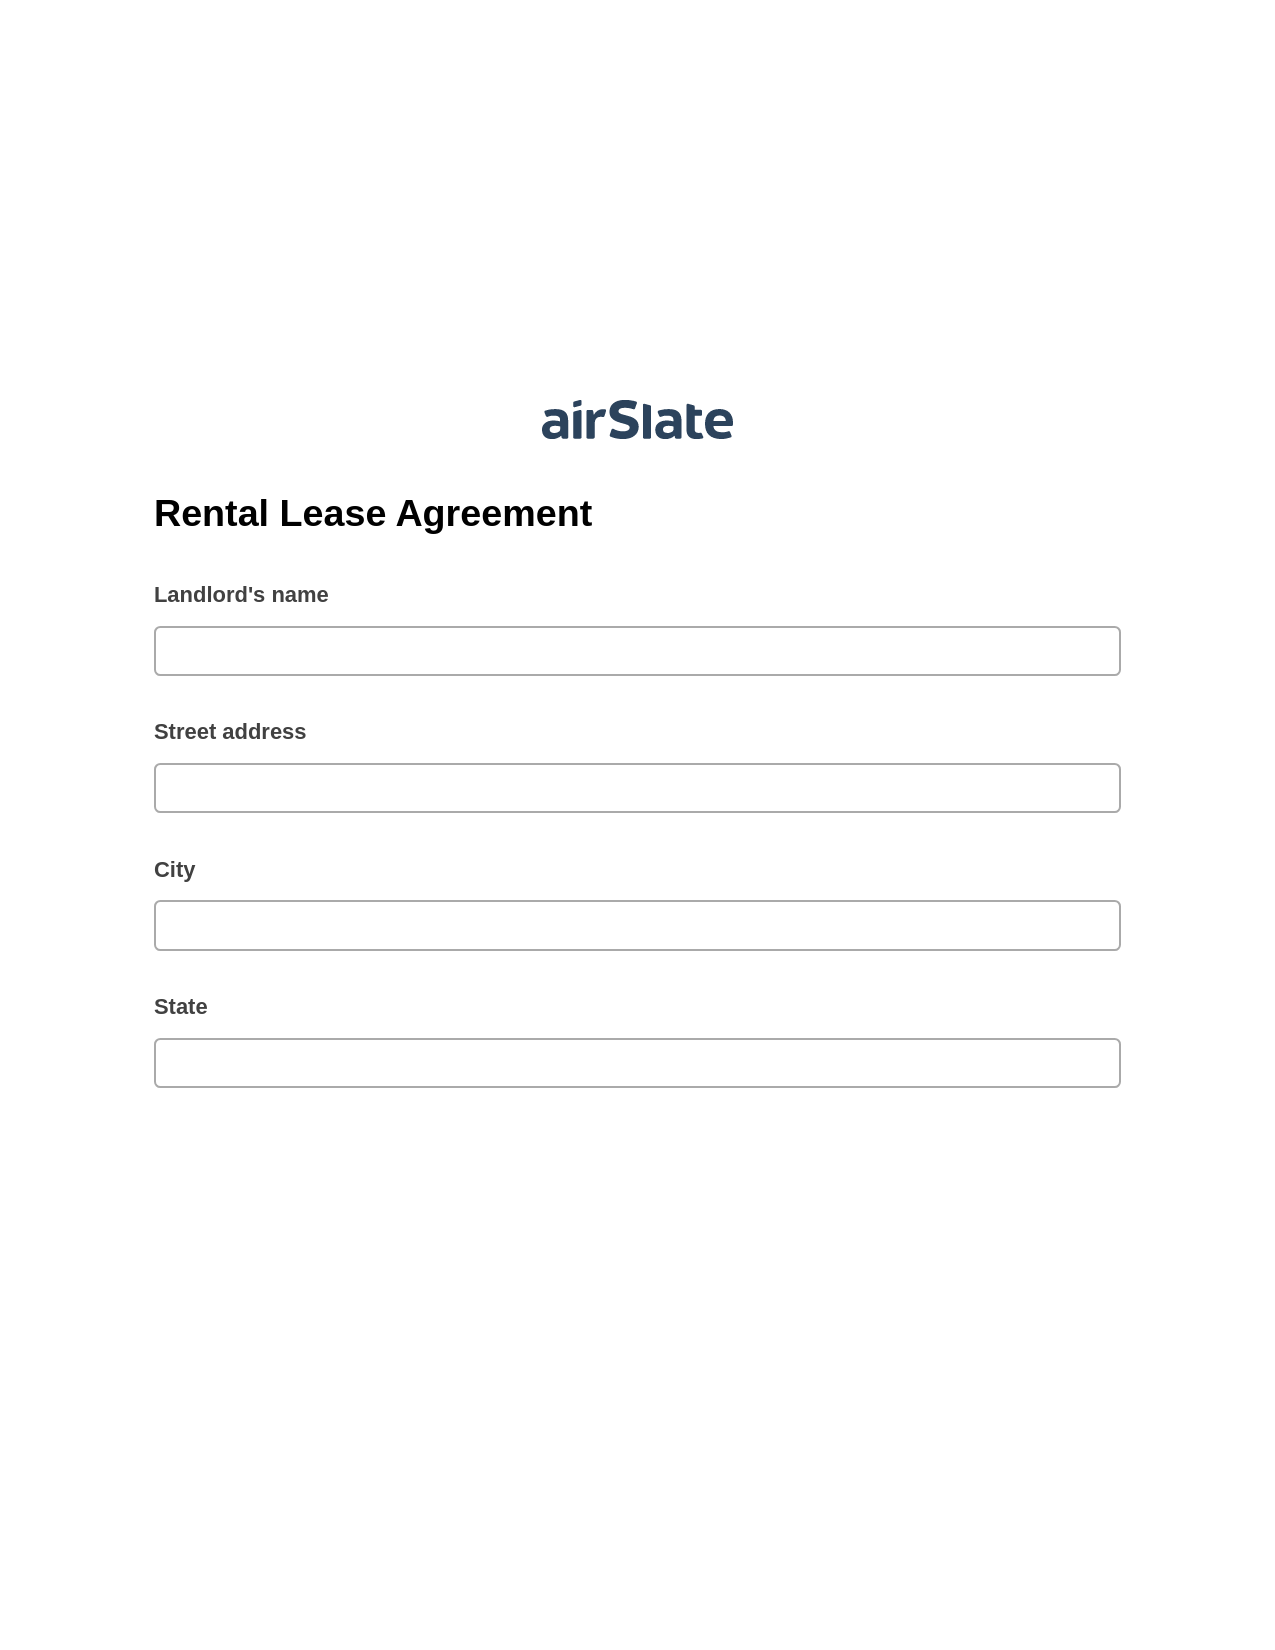 Multirole Rental Lease Agreement Pre-fill from Google Sheet Dropdown Options Bot, Text Message Notification Bot, Export to Excel 365 Bot